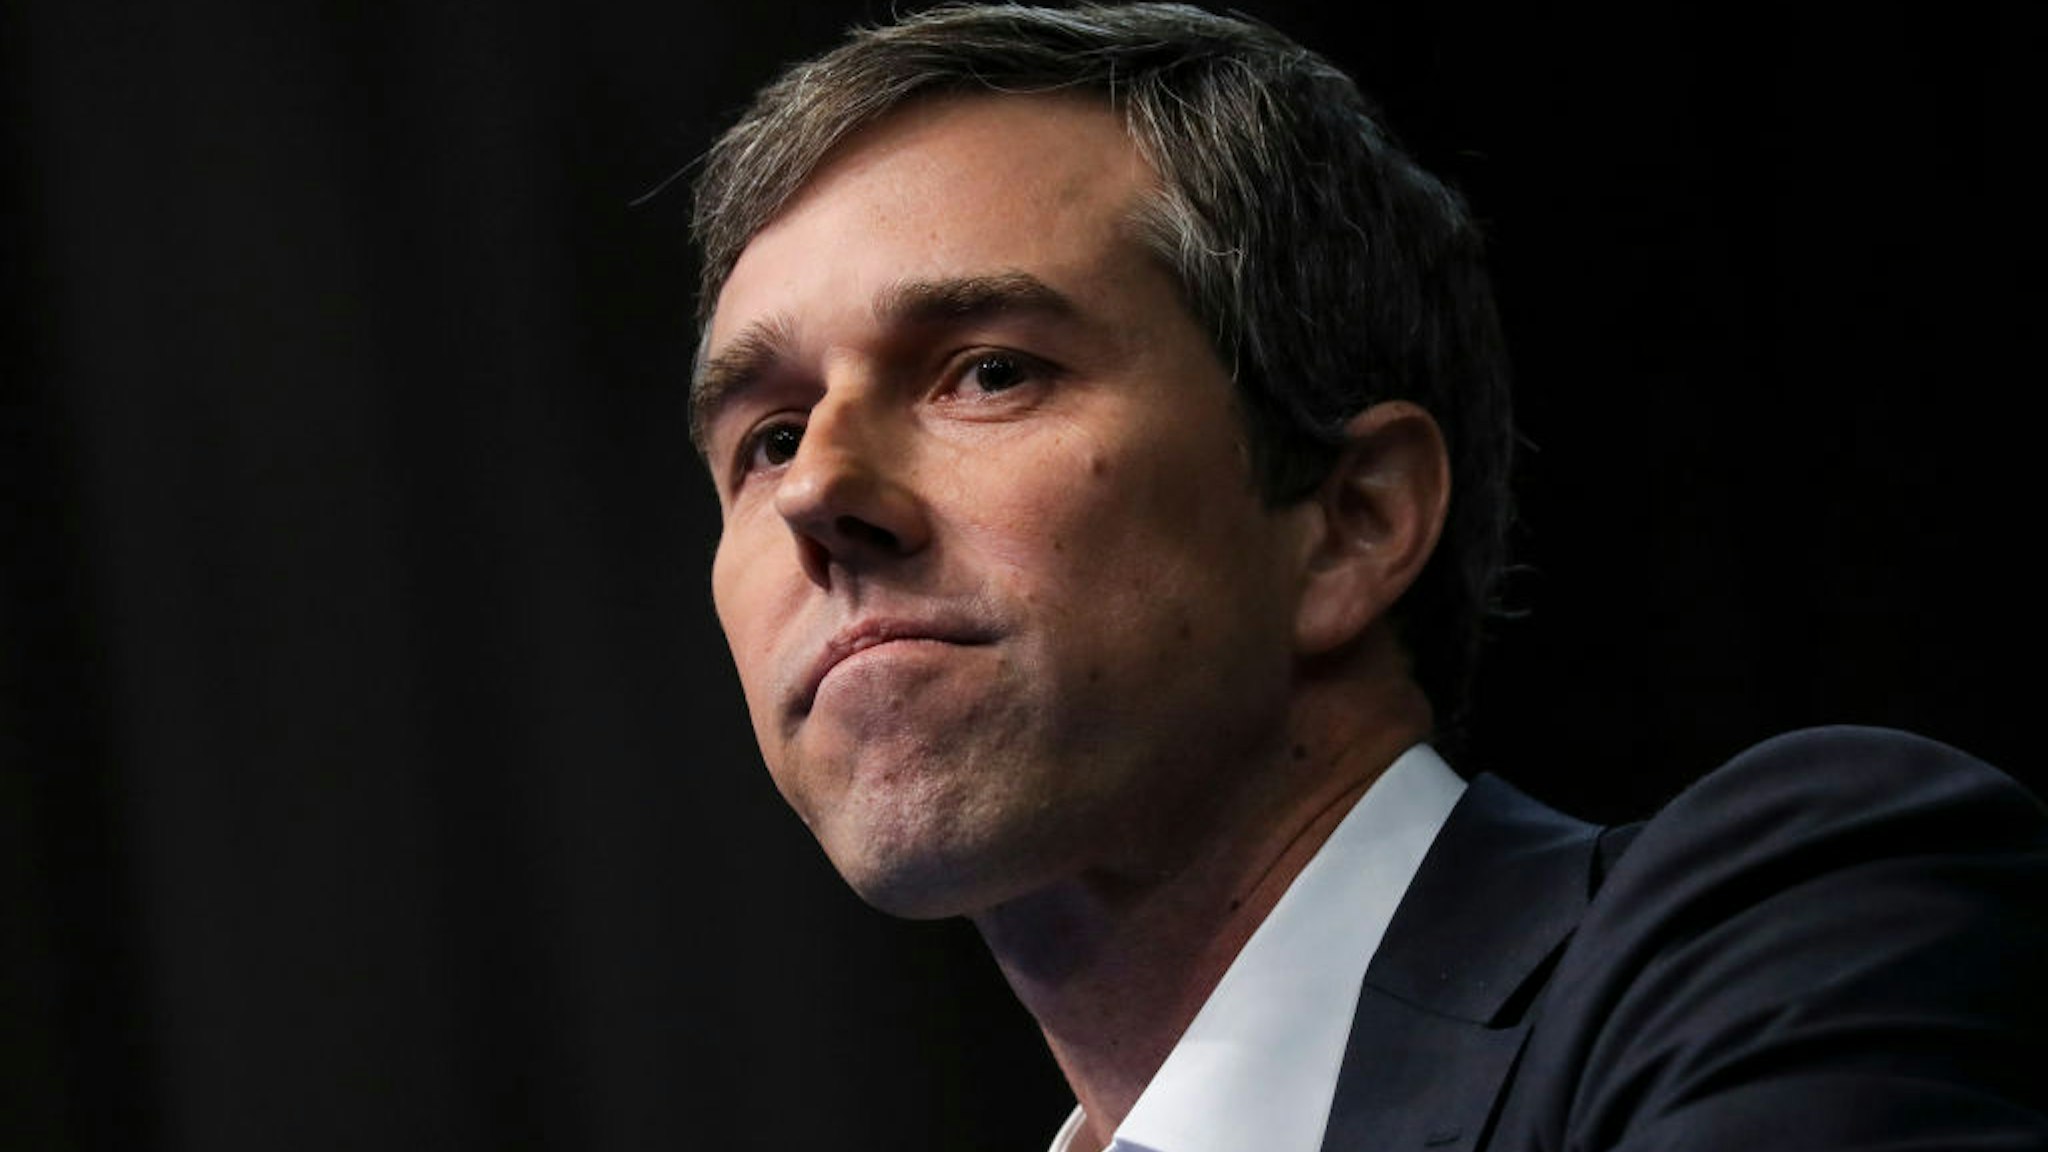 Beto O'Rourke speaks at the National Action Network's annual convention